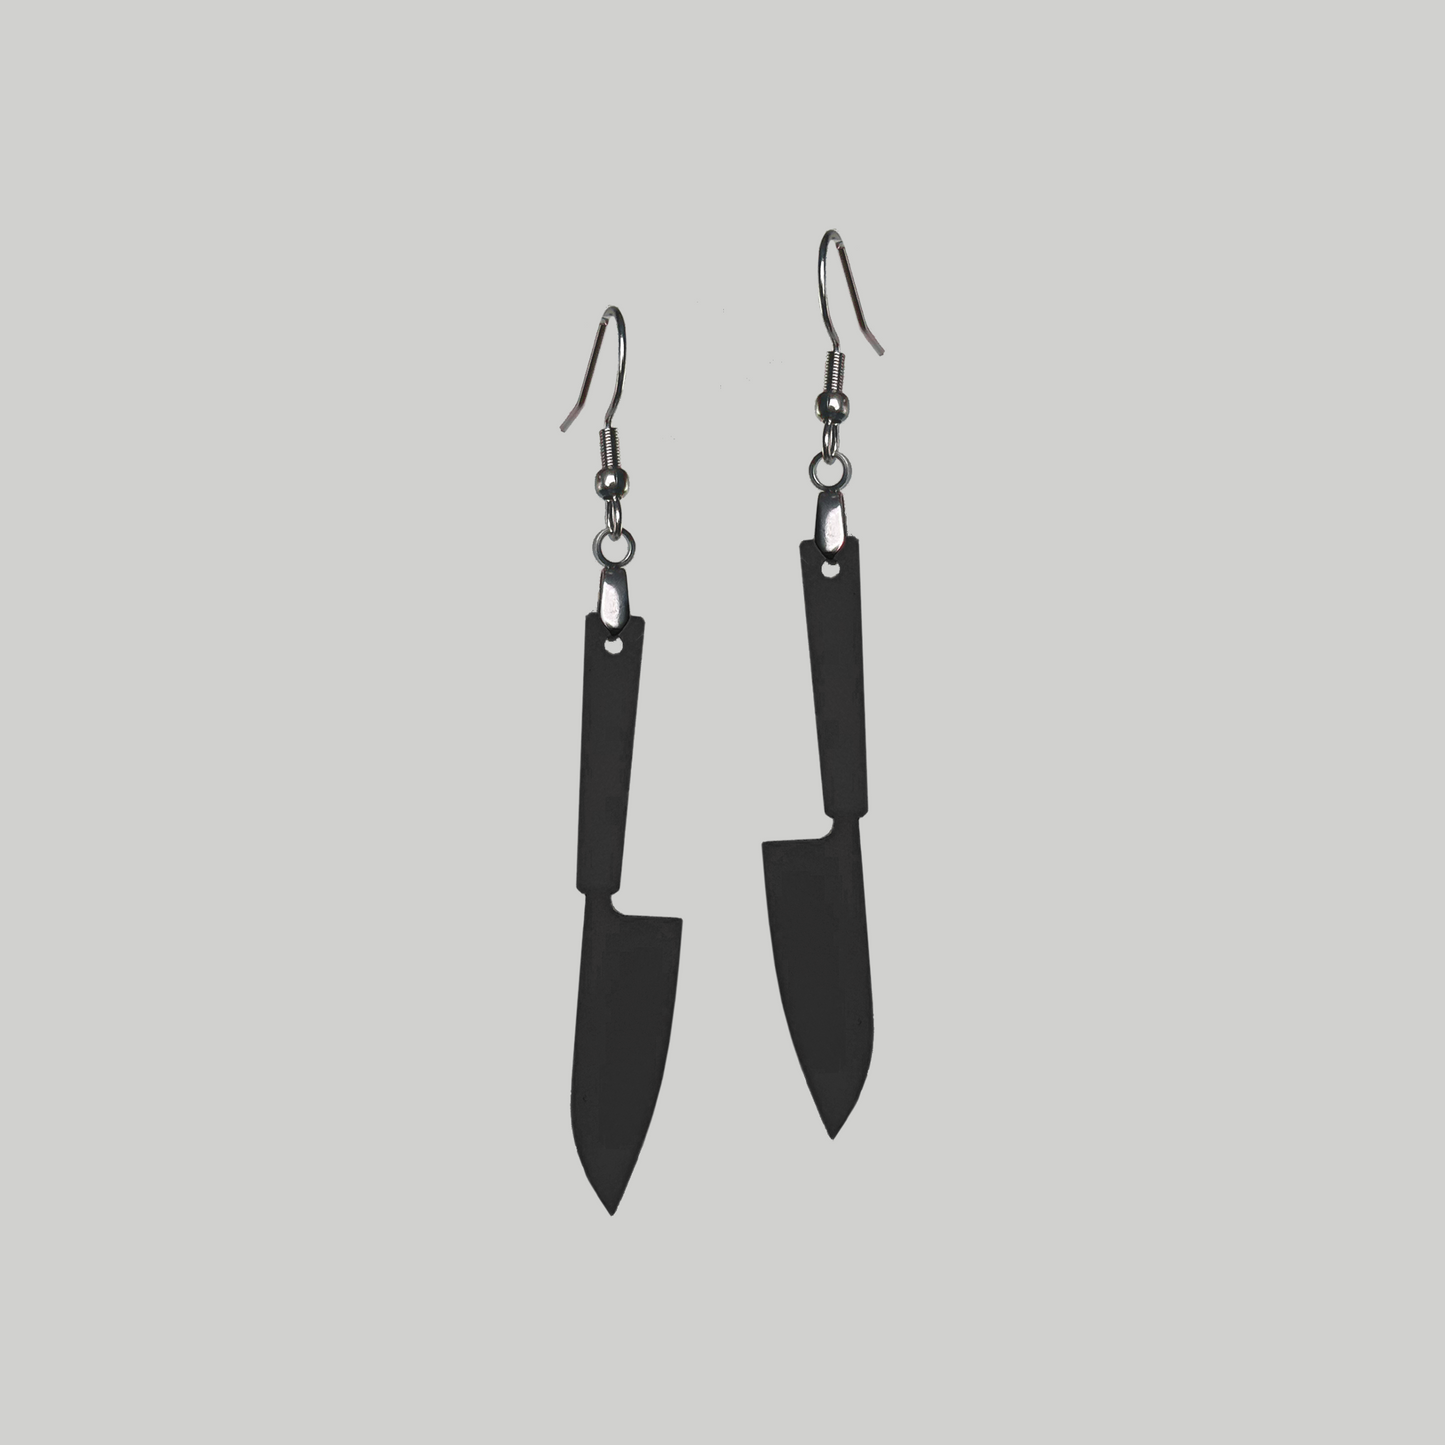 Knife Edge Glam: Make a statement with these knife earrings, blending an edgy aesthetic with a touch of glamorous allure.